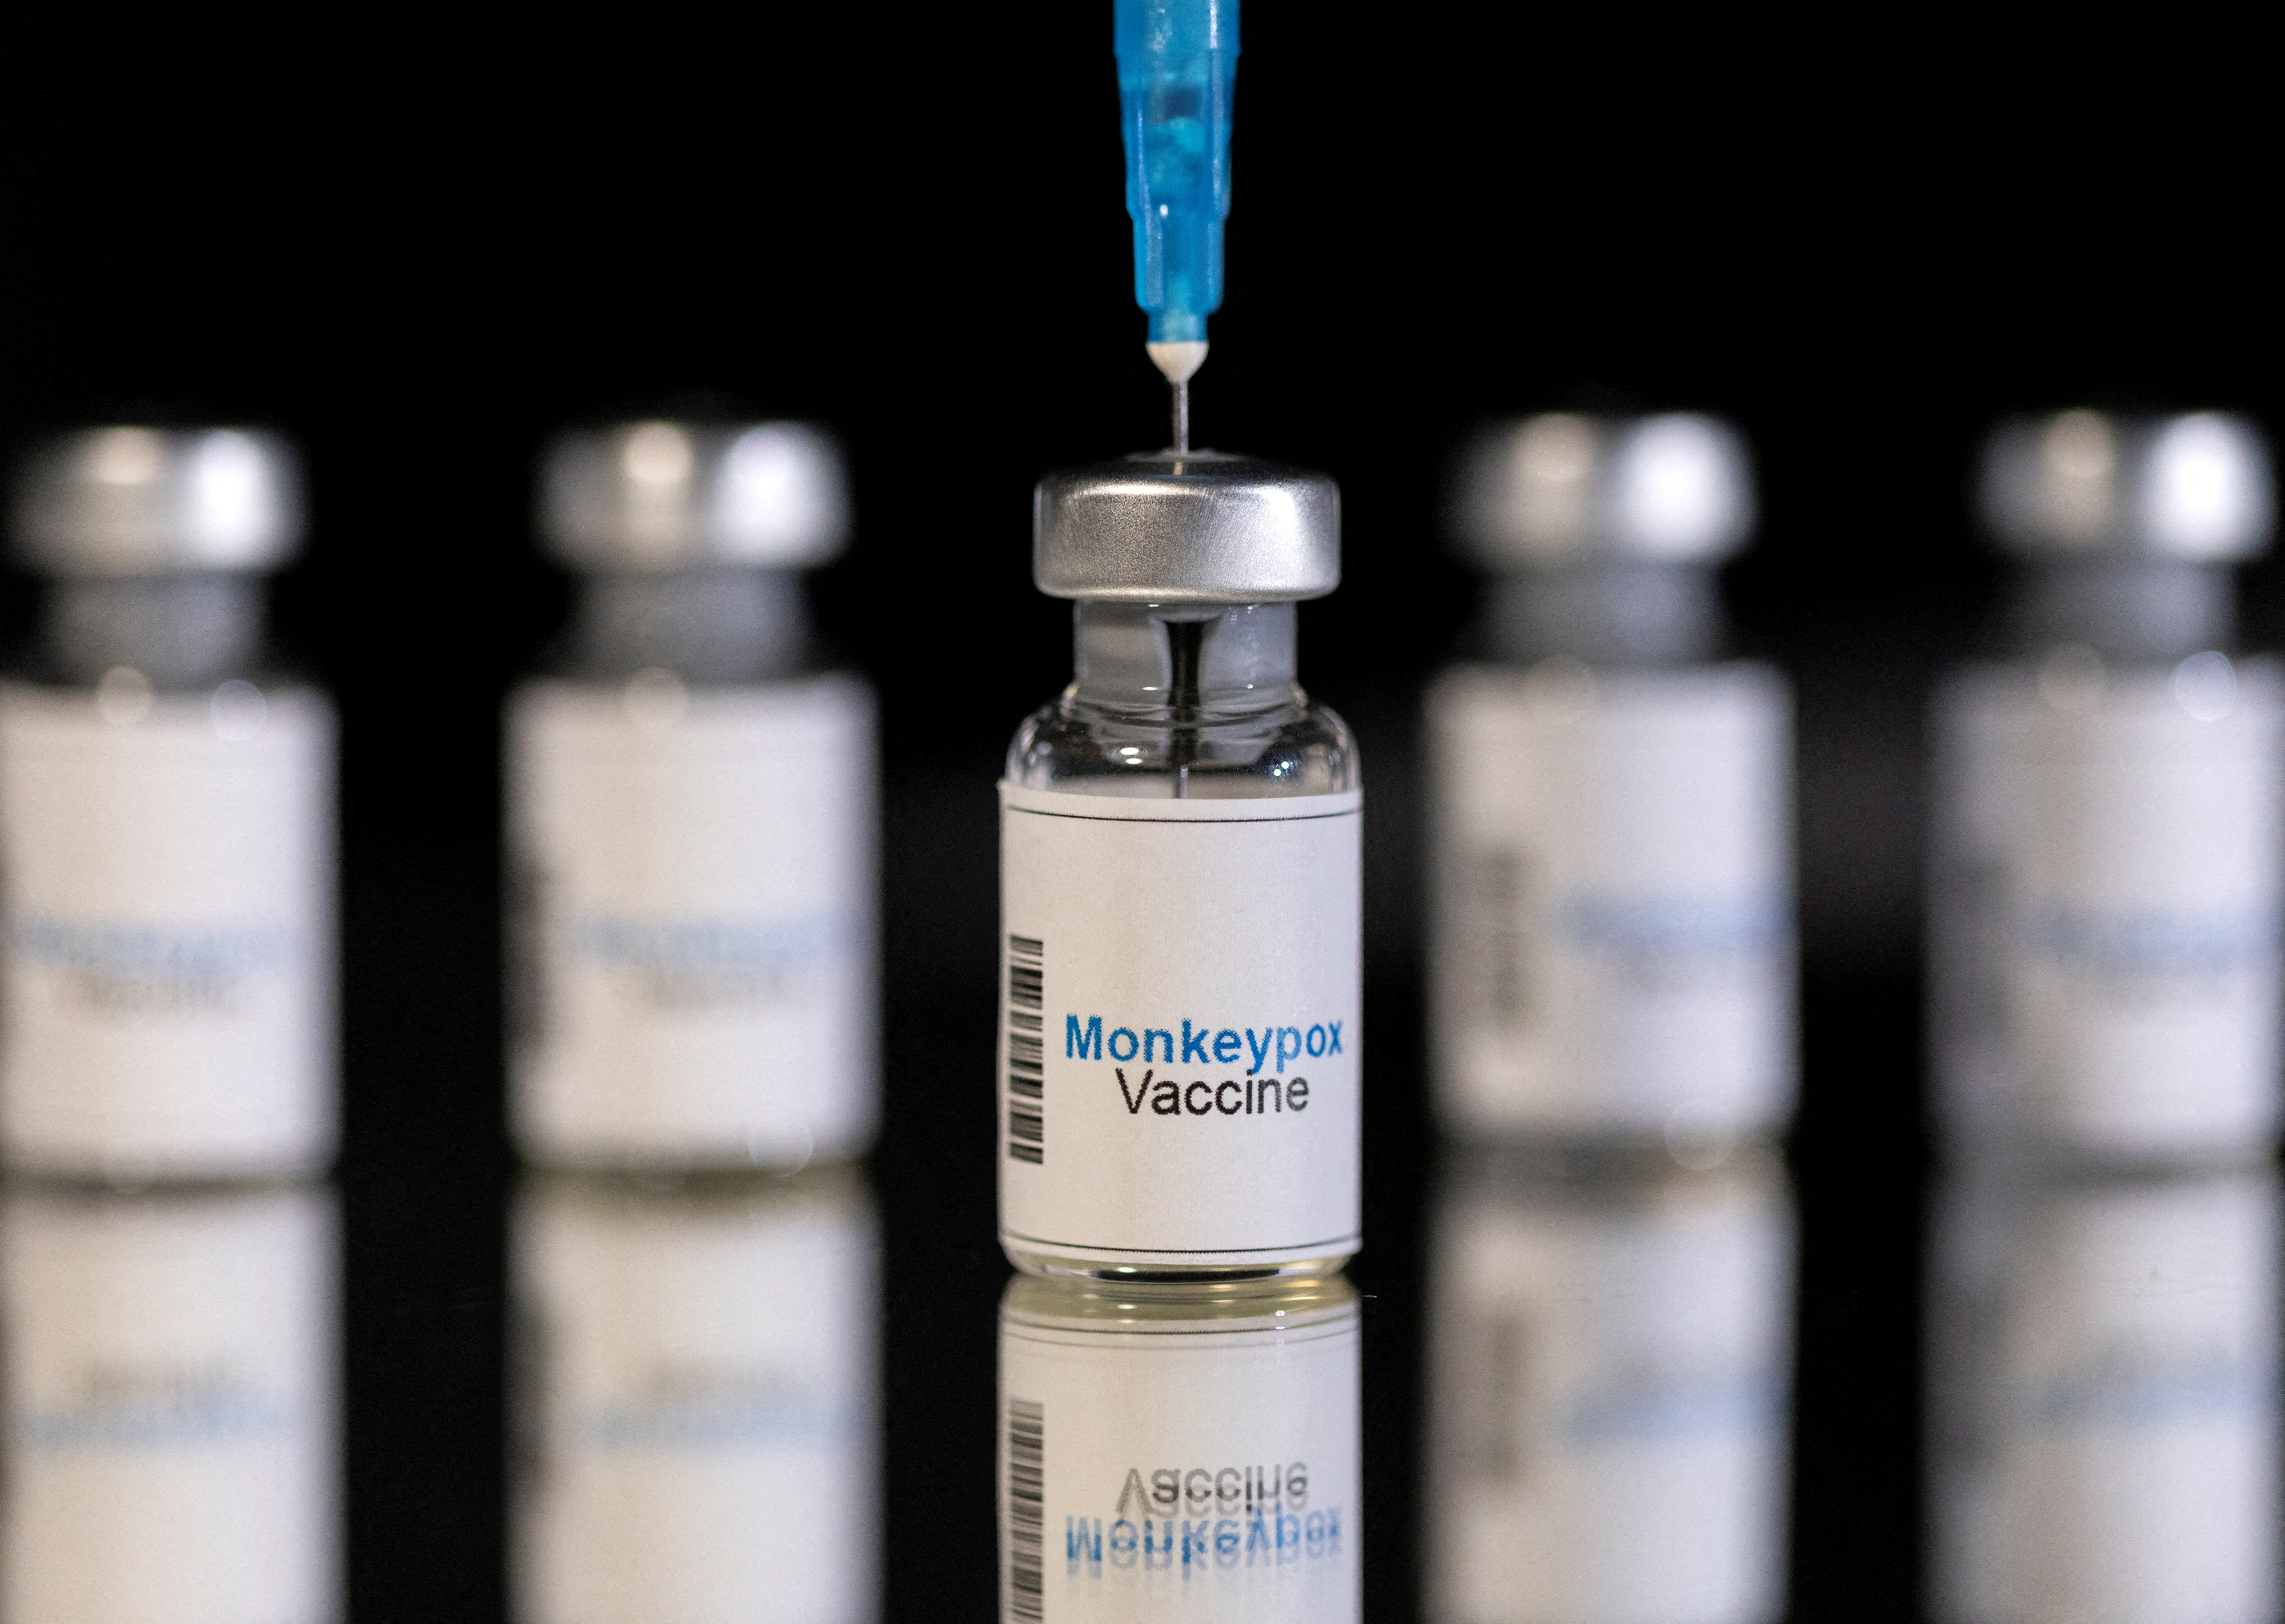 image Britain to pilot using smaller doses of monkeypox vaccine to boost supply